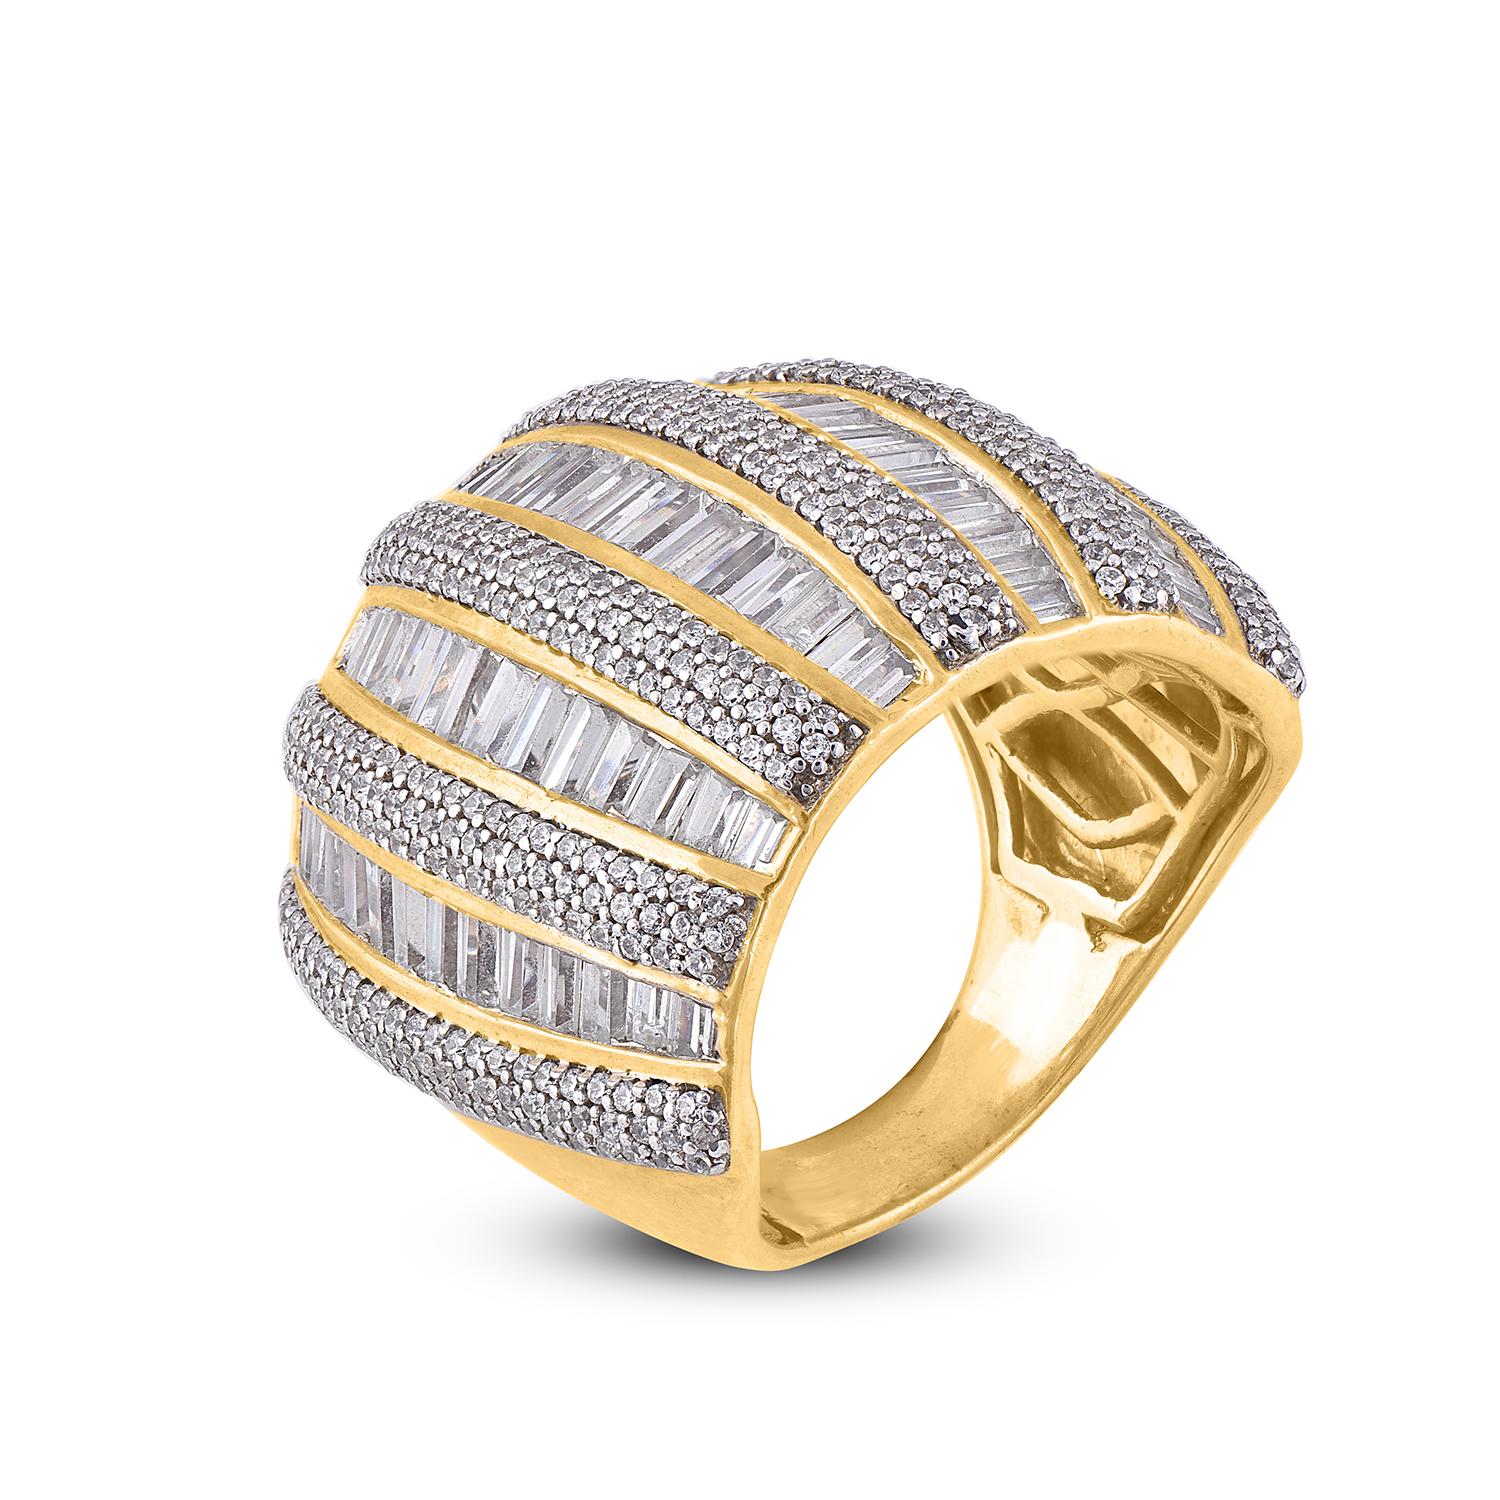 This Designer diamond wedding band ring is accentuated with 14 Karat yellow gold with 438 round and 66 baguette diamond beautifully set in prong and channel setting. The total diamond weight is 5.00 Carat and H-I color I2 Clarity.
